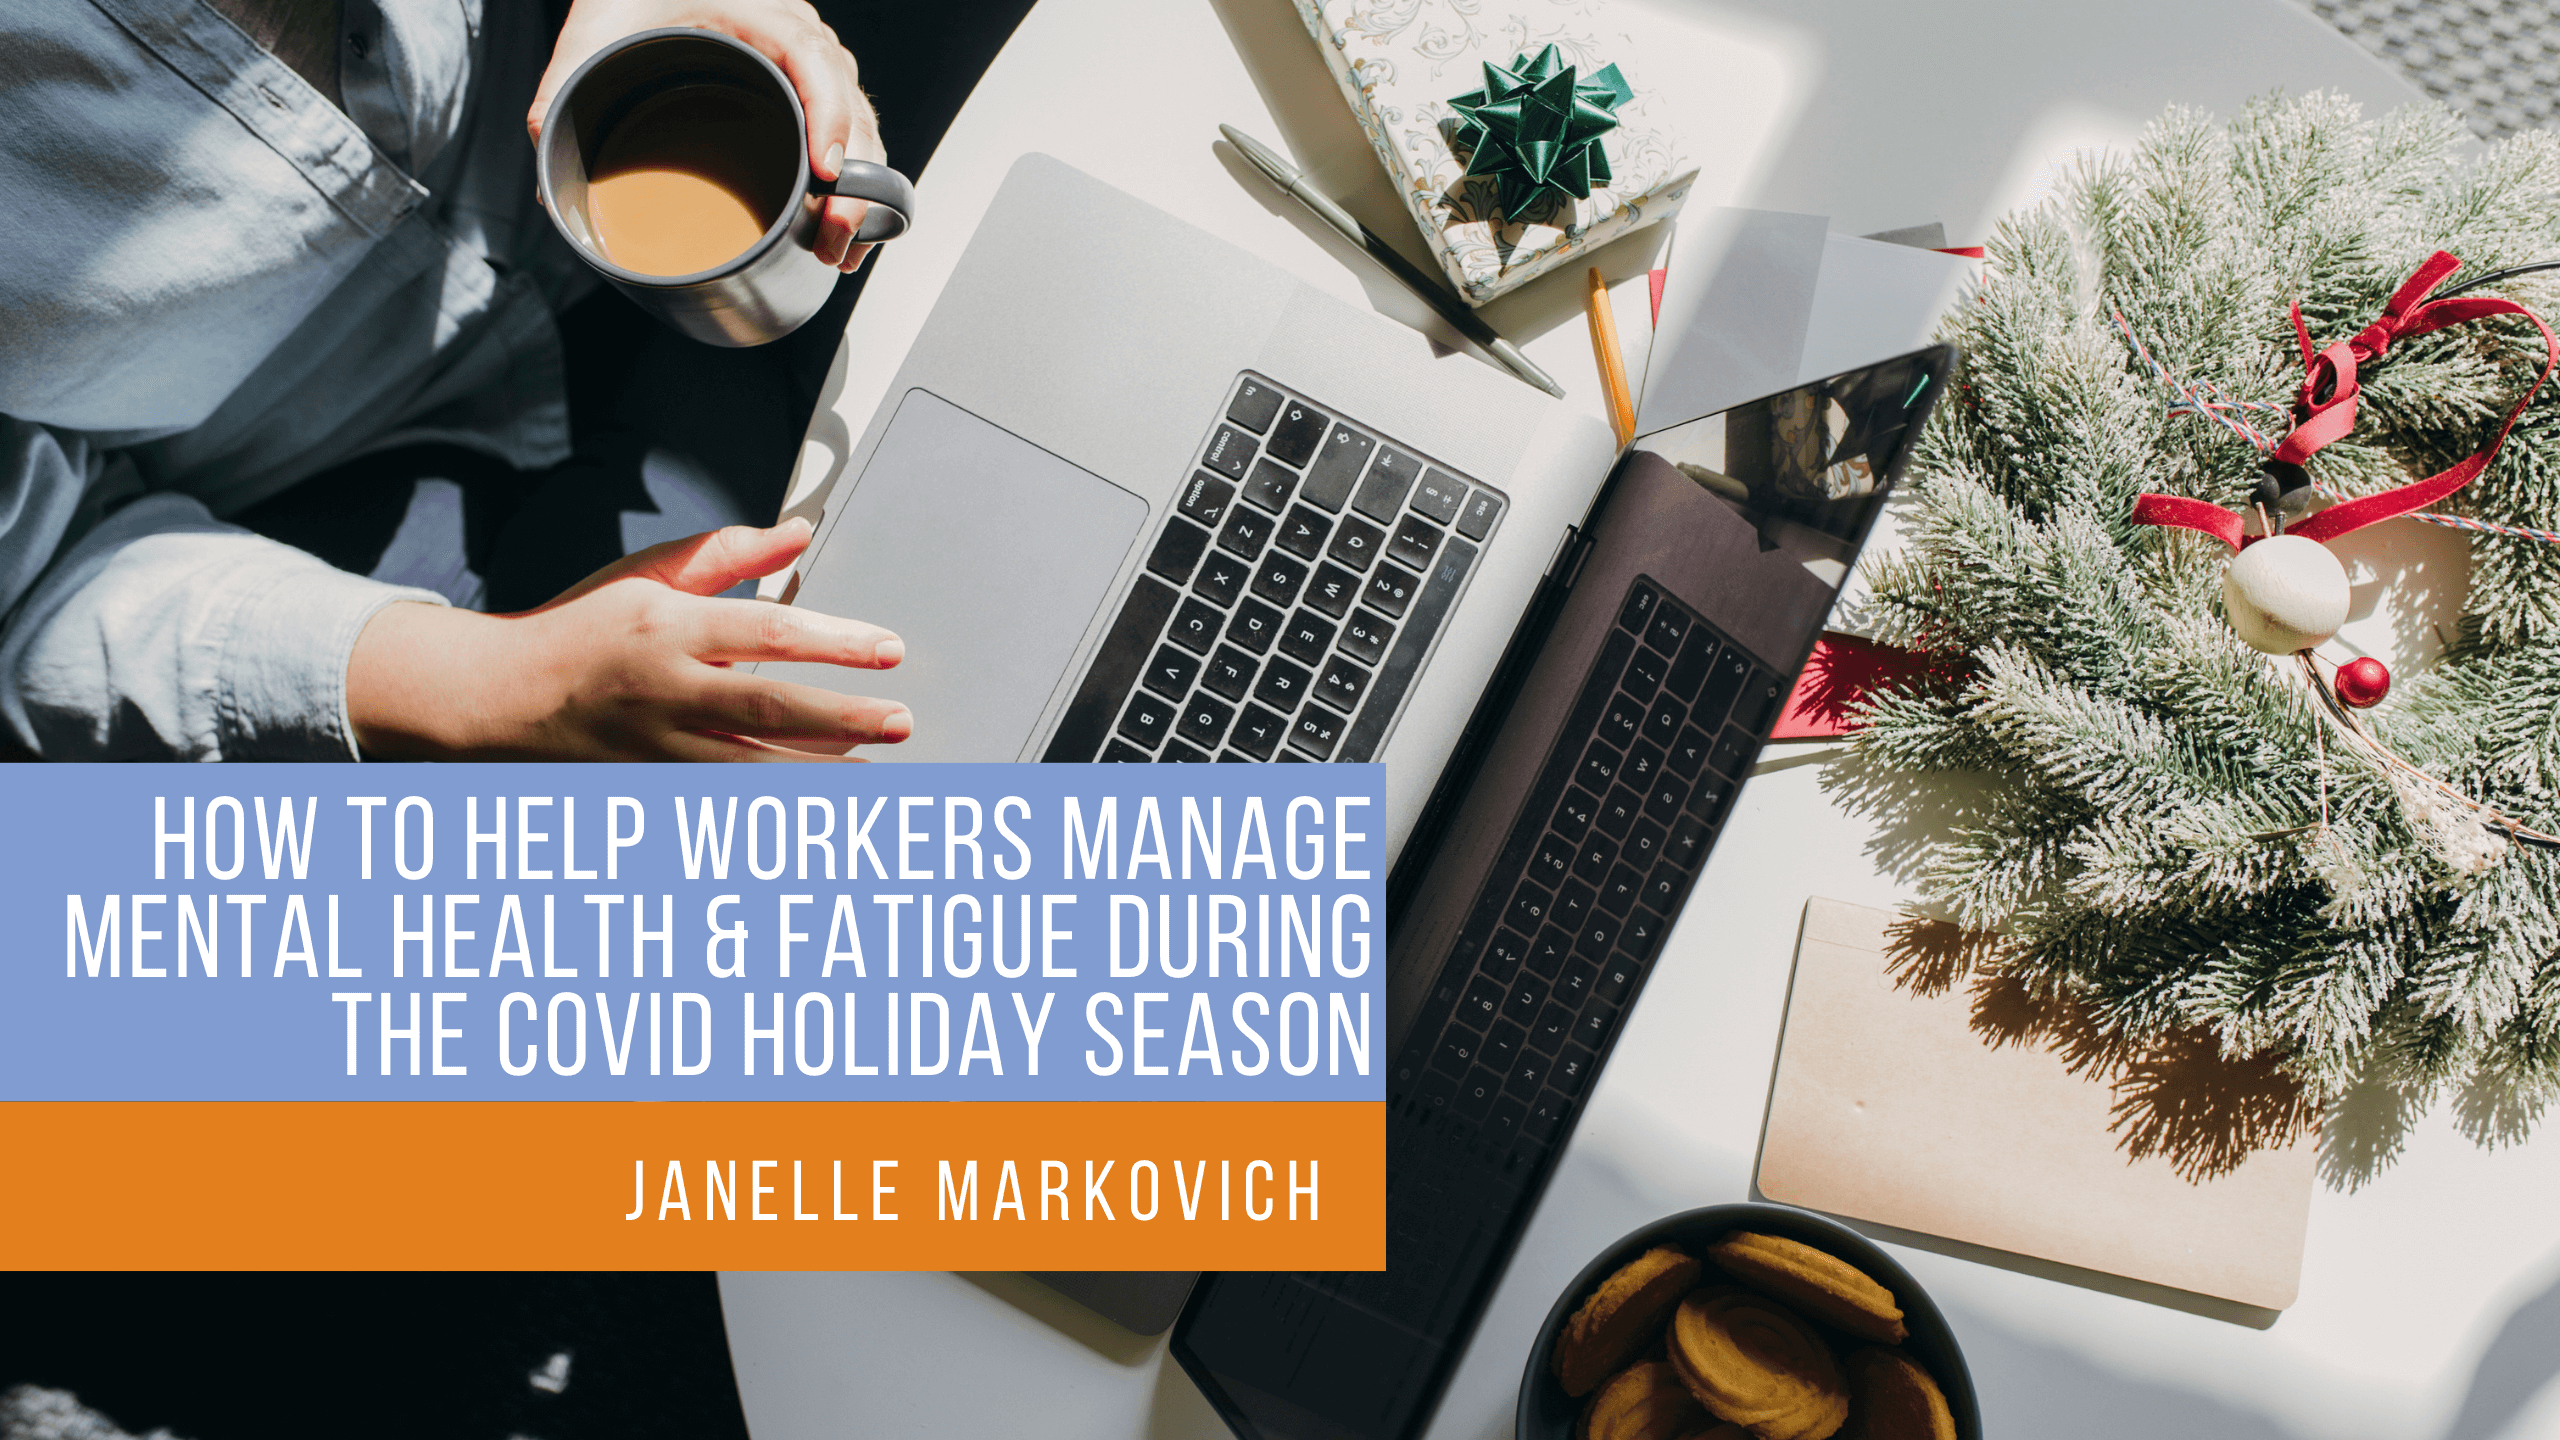 How to Help Workers Manage Mental Health & Fatigue During the COVID Holiday Season